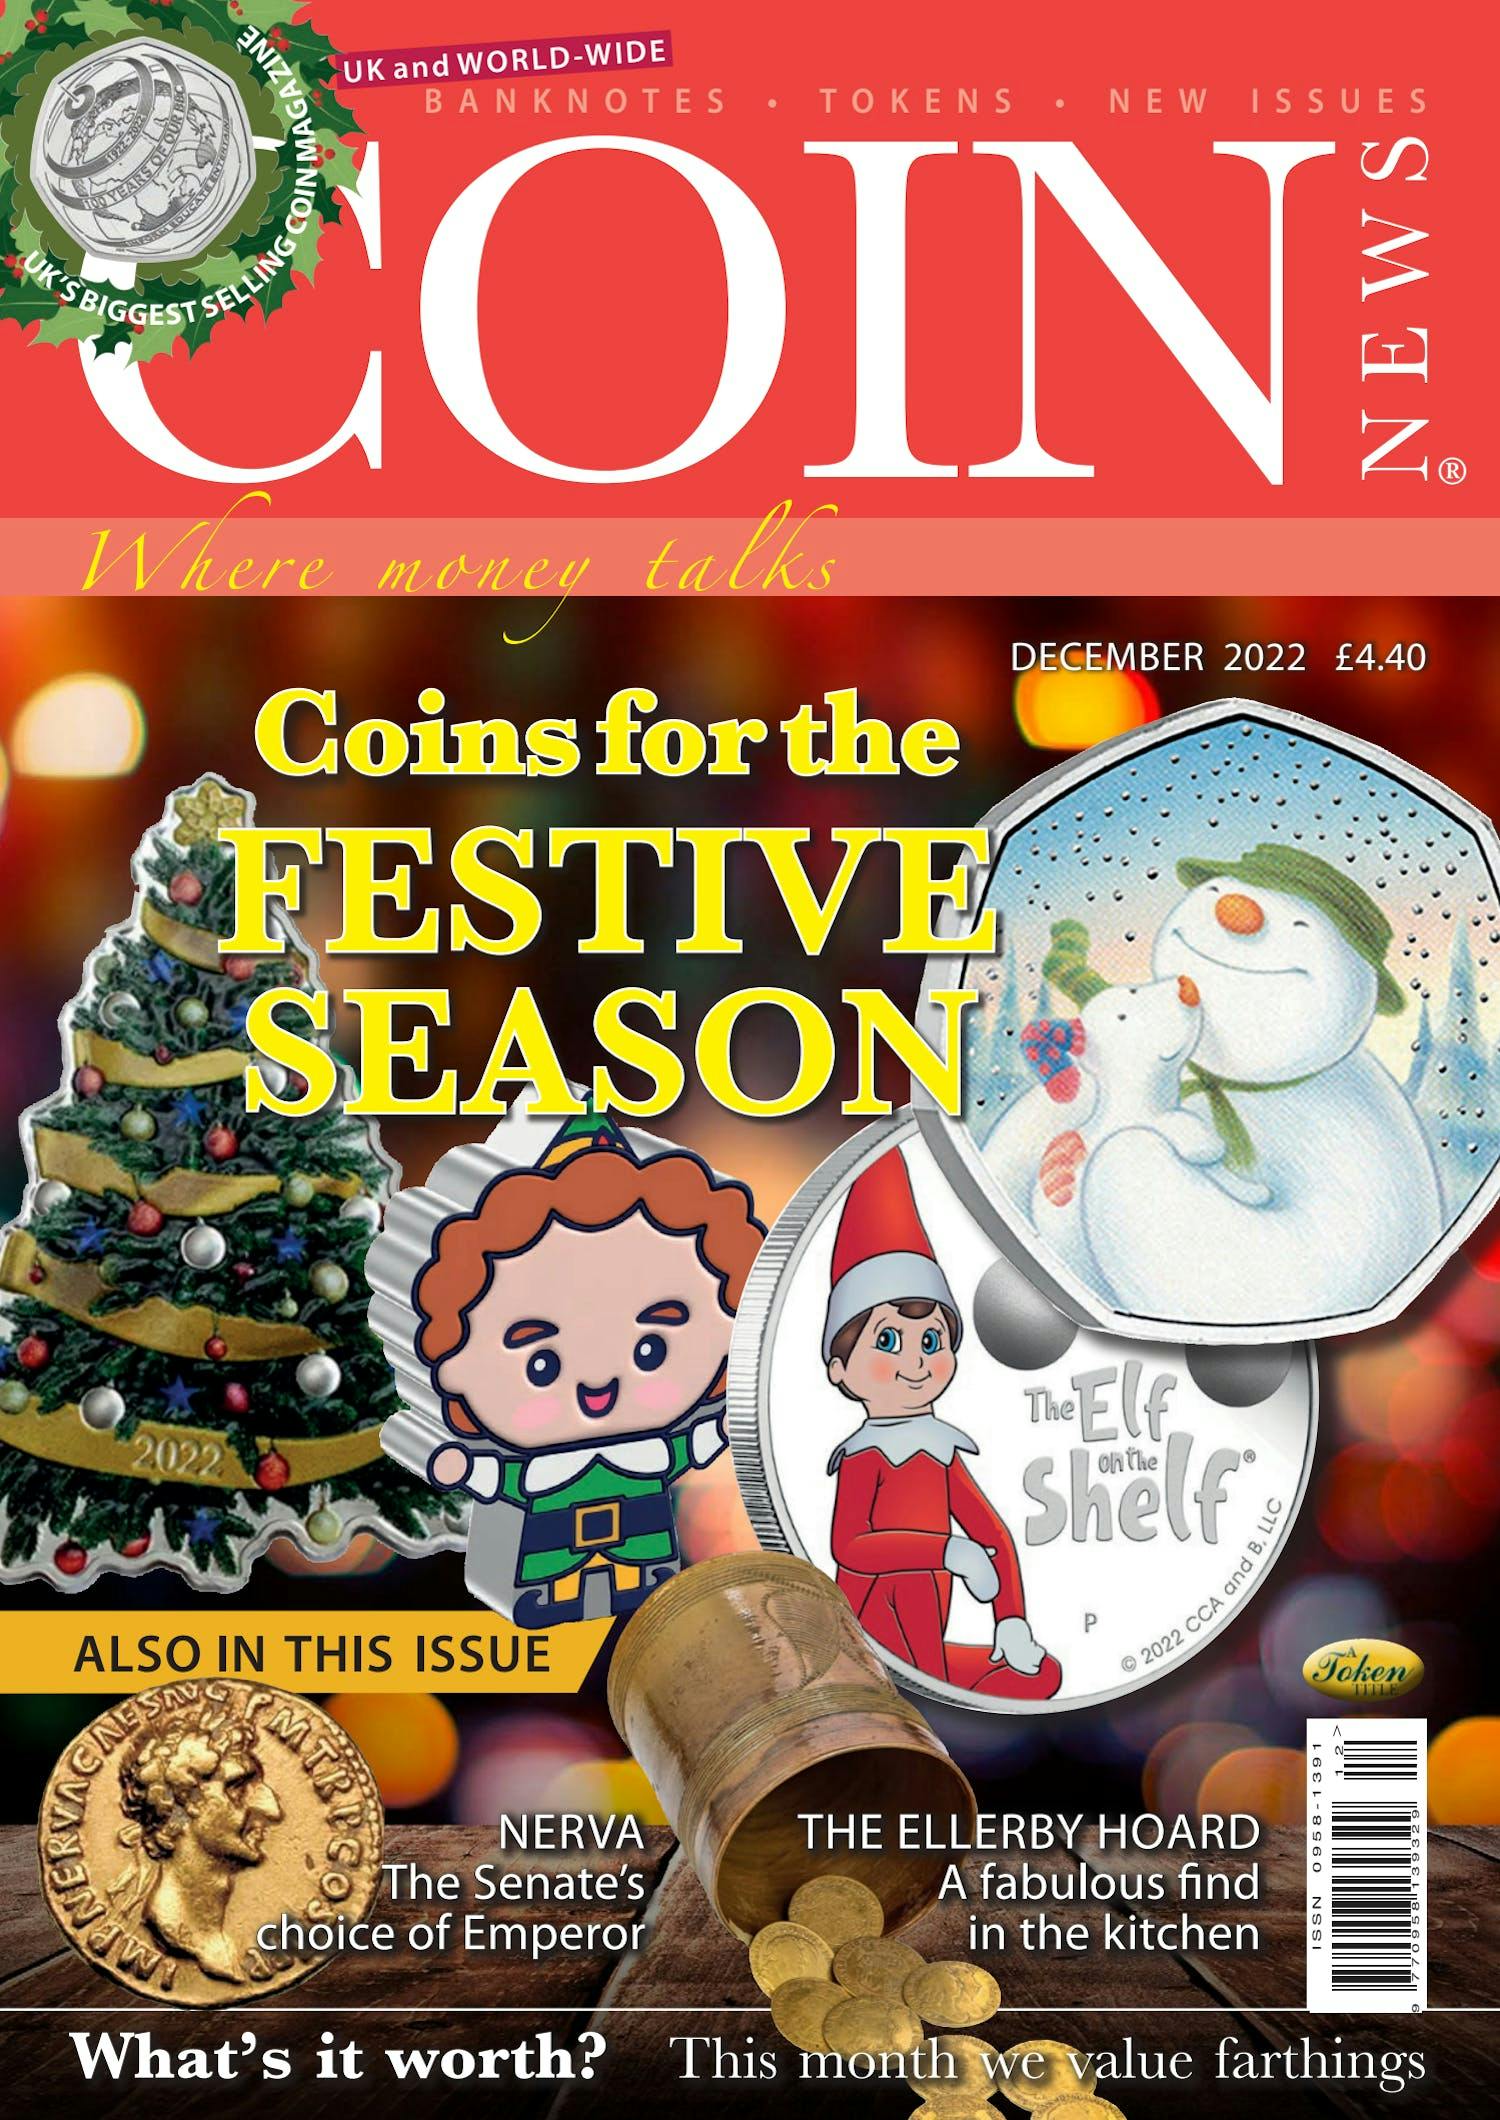 The front cover of Coin News, December 2022 - Volume 59, Number 12